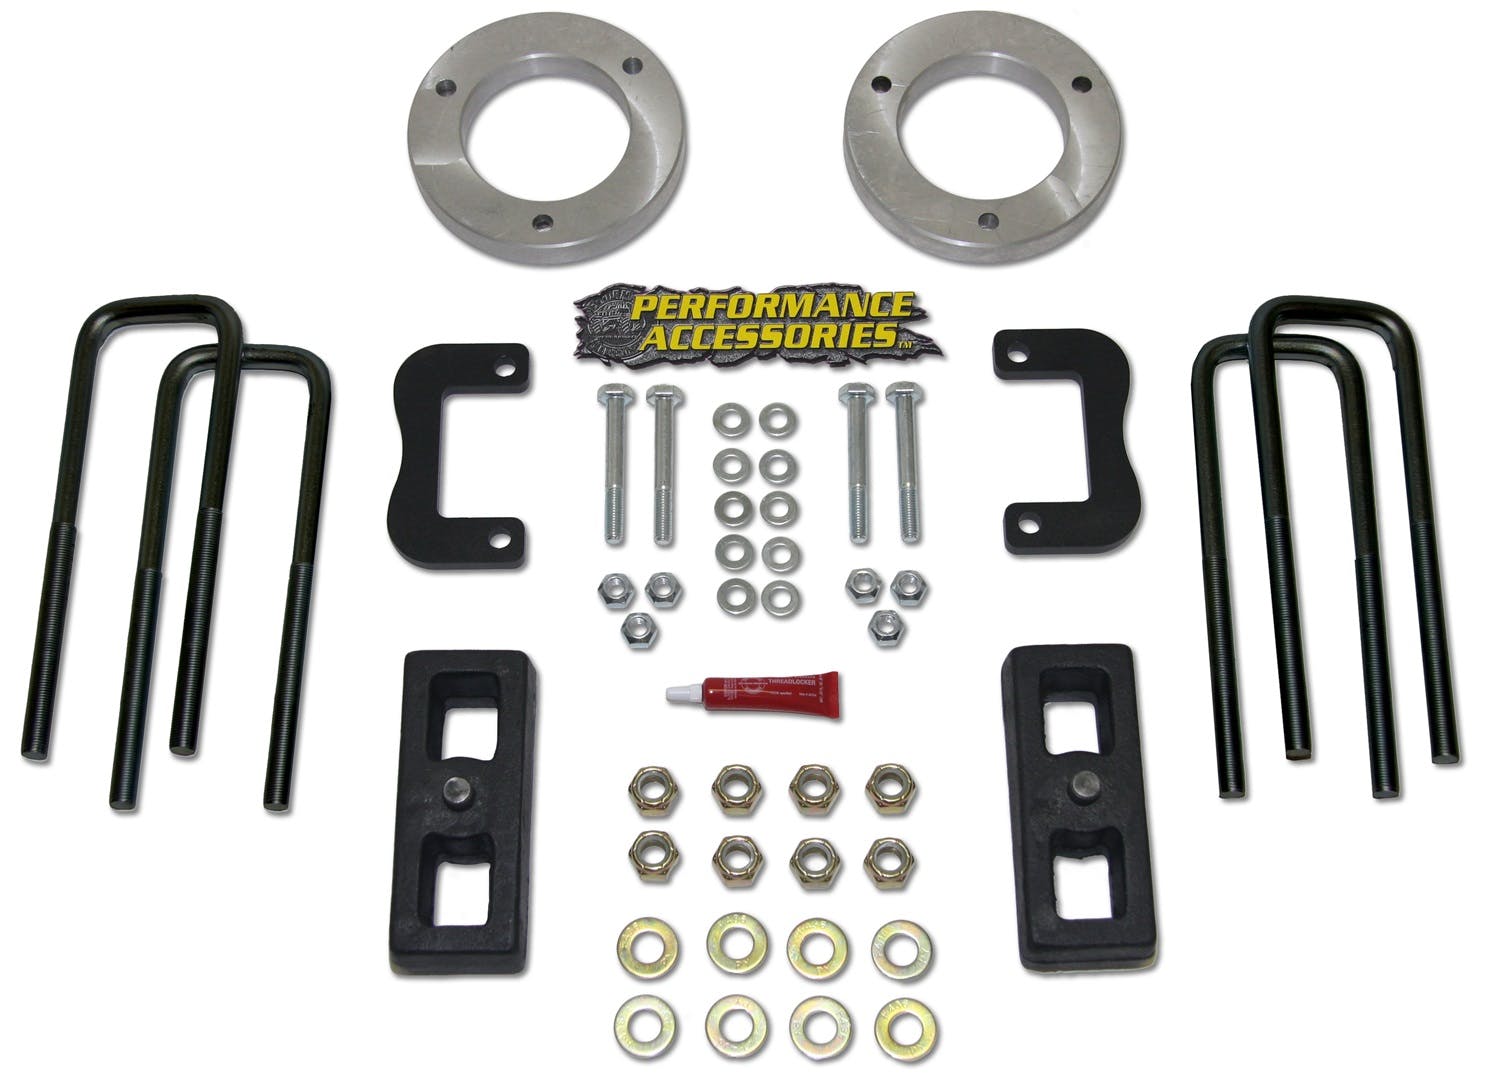 Performance Accessories PACL231PA Performance Accessories 3 inch front strut extension and 1 inch rear lift